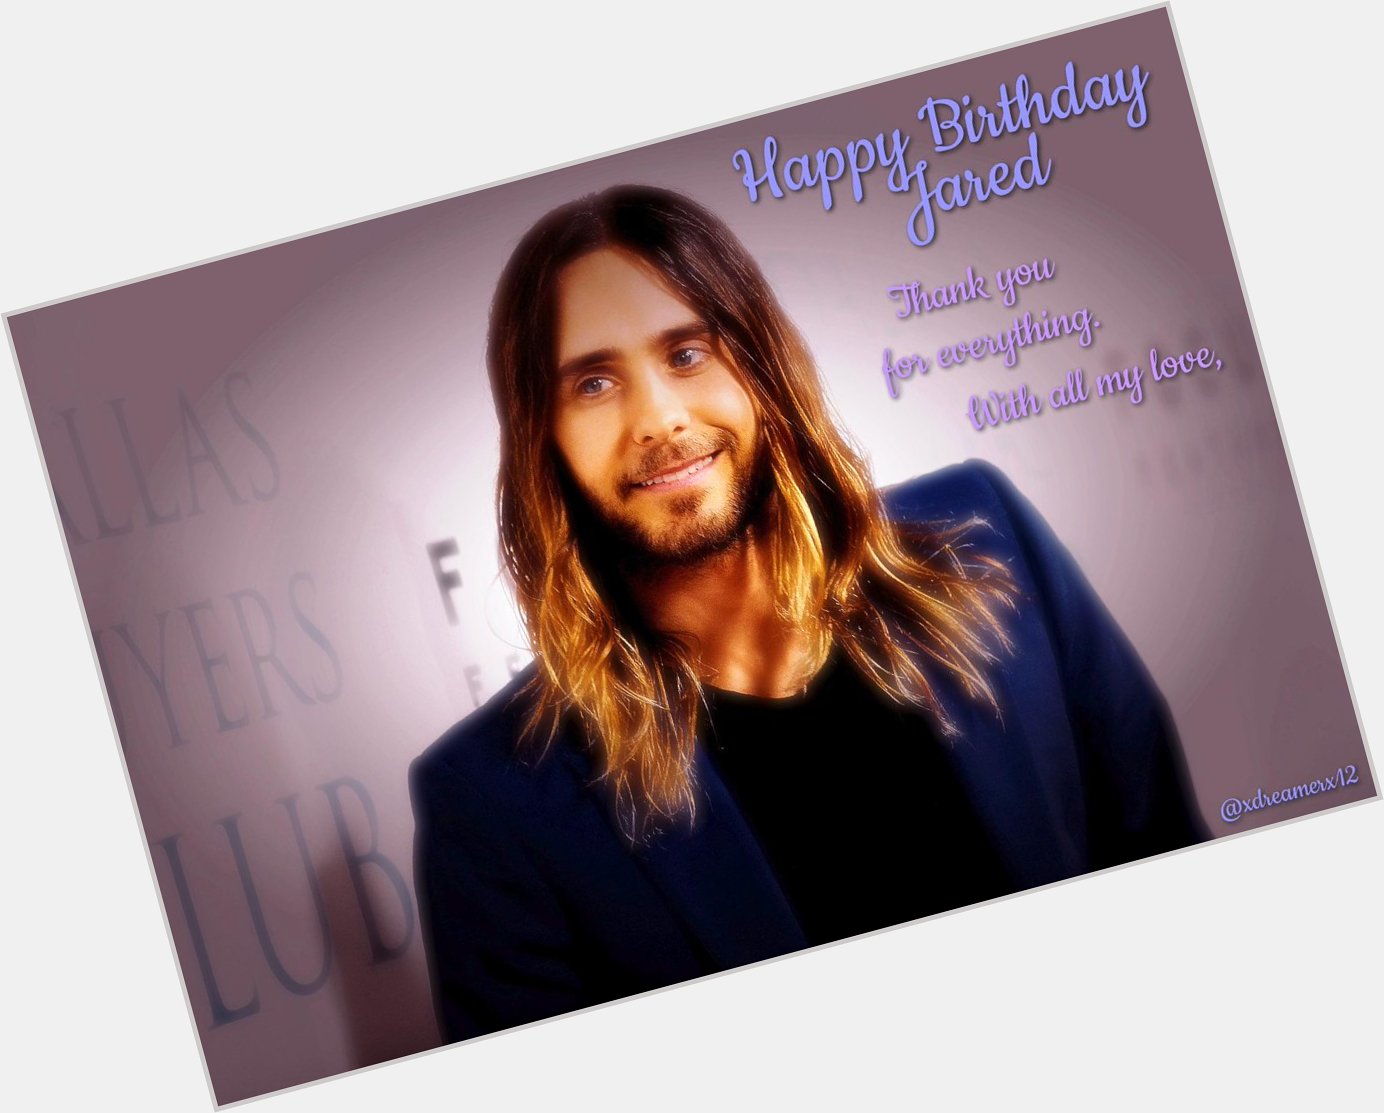  Happy Birthday Jared Leto Thank you for coming into my life With all my love, always 